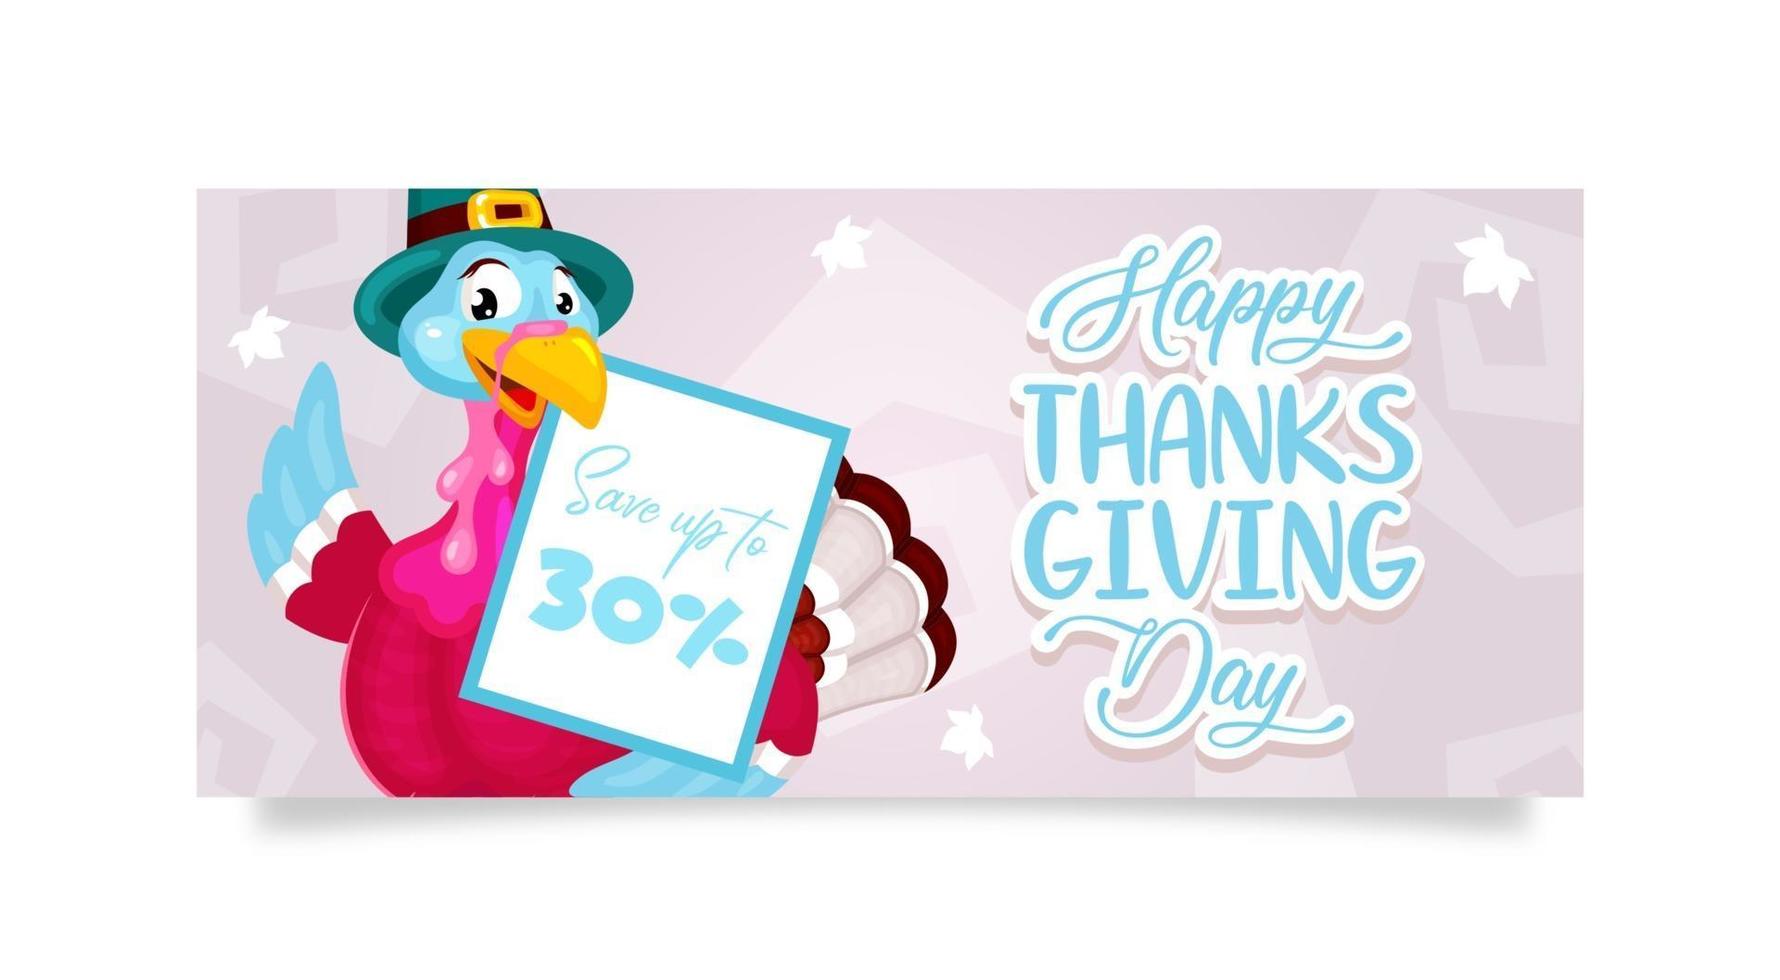 Happy Thanksgiving day banner flat vector template. Autumn holiday discount. Piligrims turkey with ad ileaflet layout idea. Advertising flyer concept design with cartoon illustrations